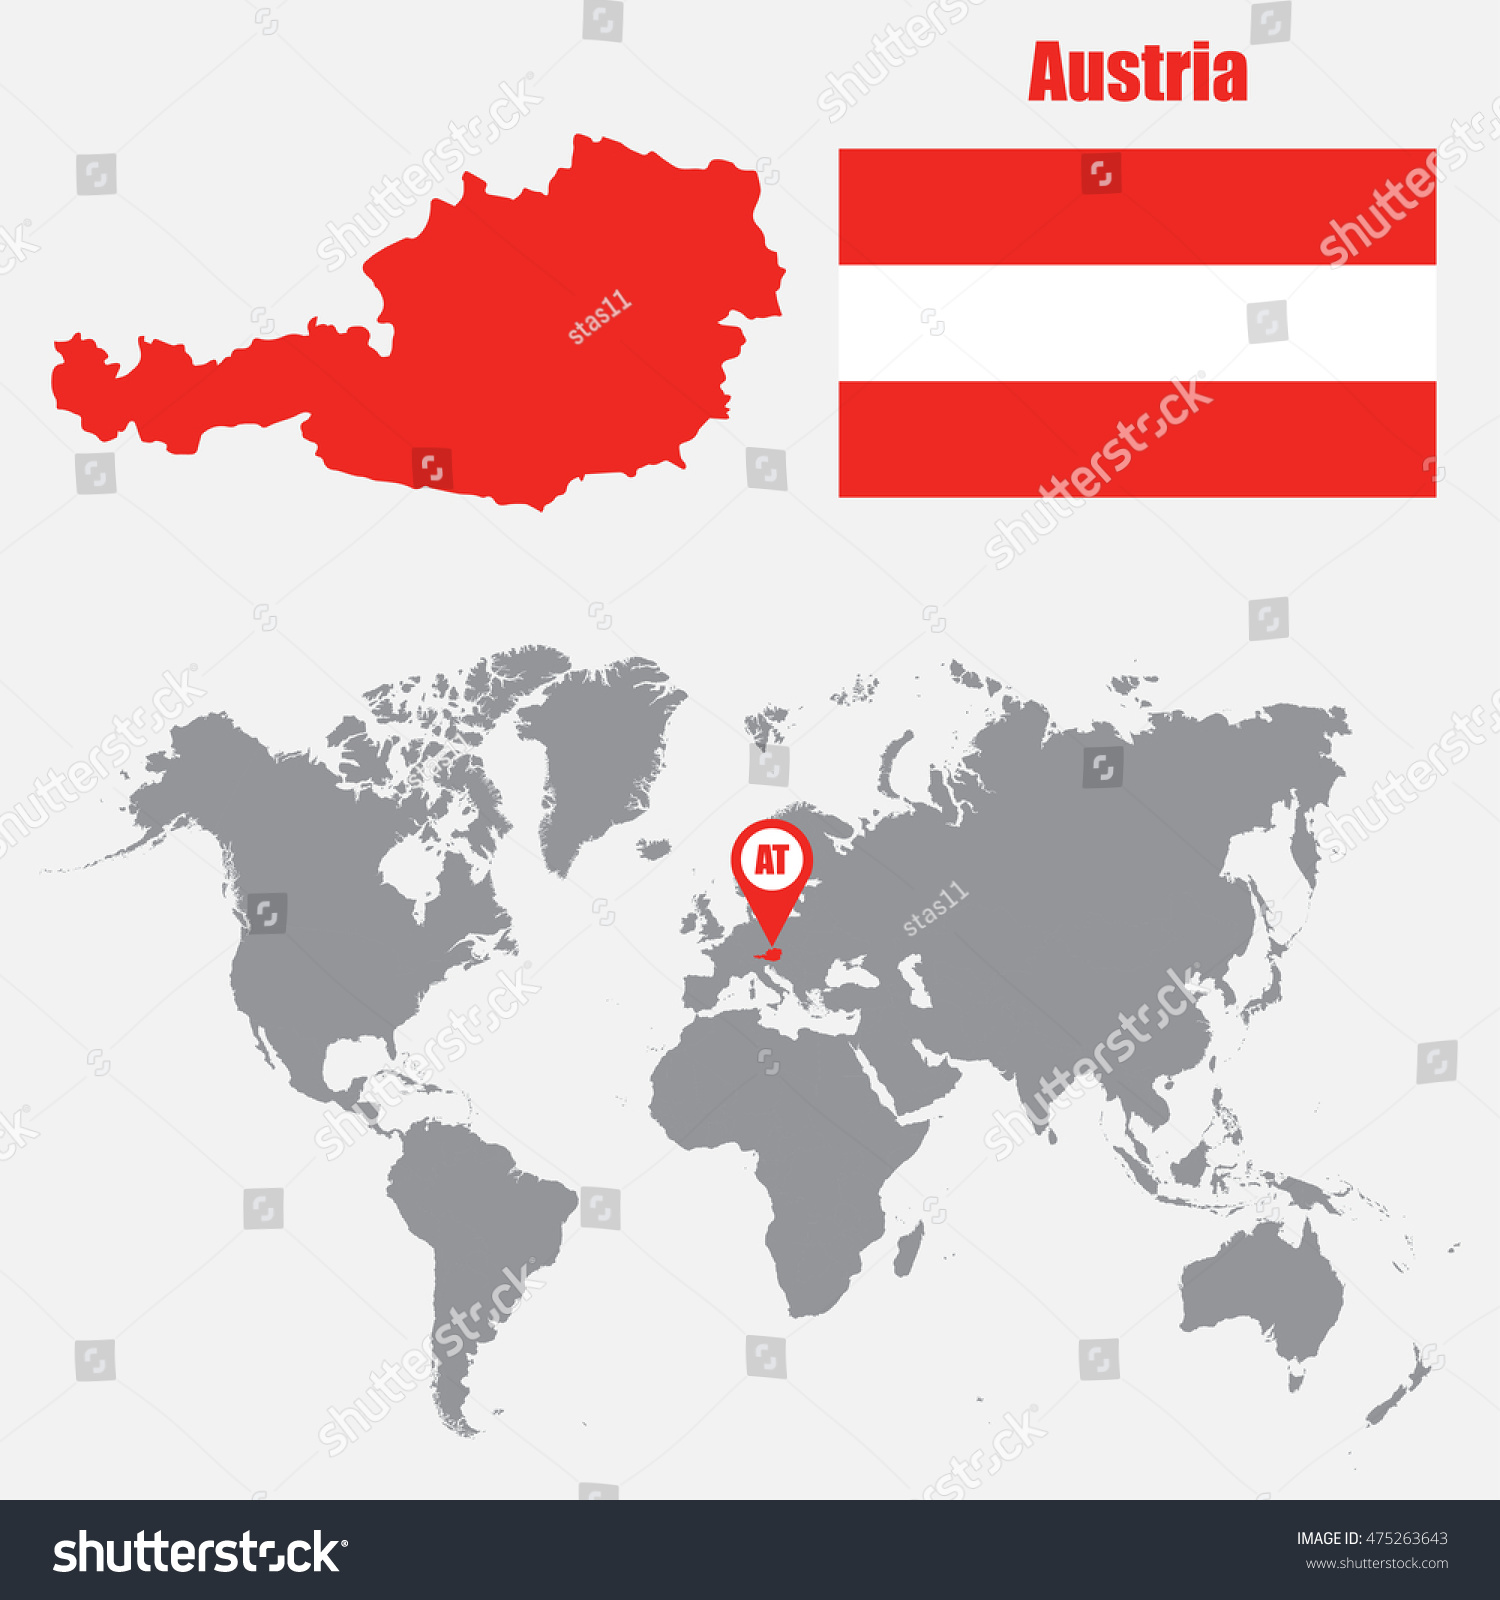 Austria Map On World Map Flag Stock Vector Royalty Free 475263643